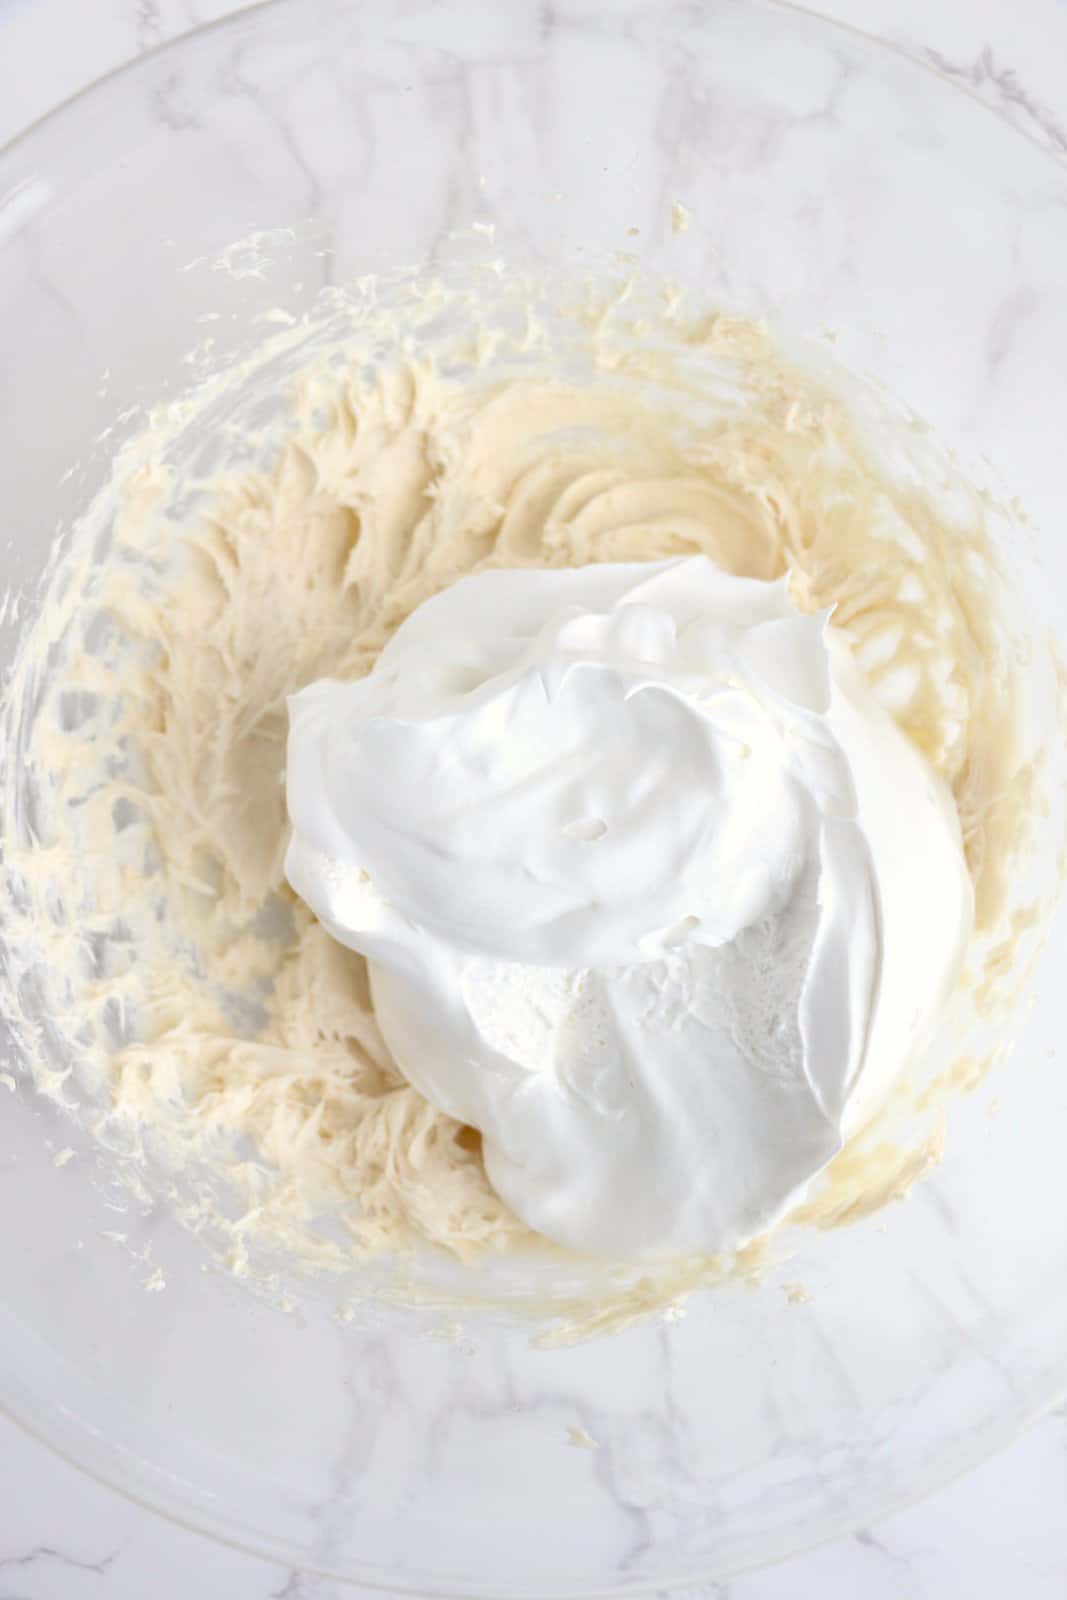 Beaten cream cheese mixture with cool whip added.